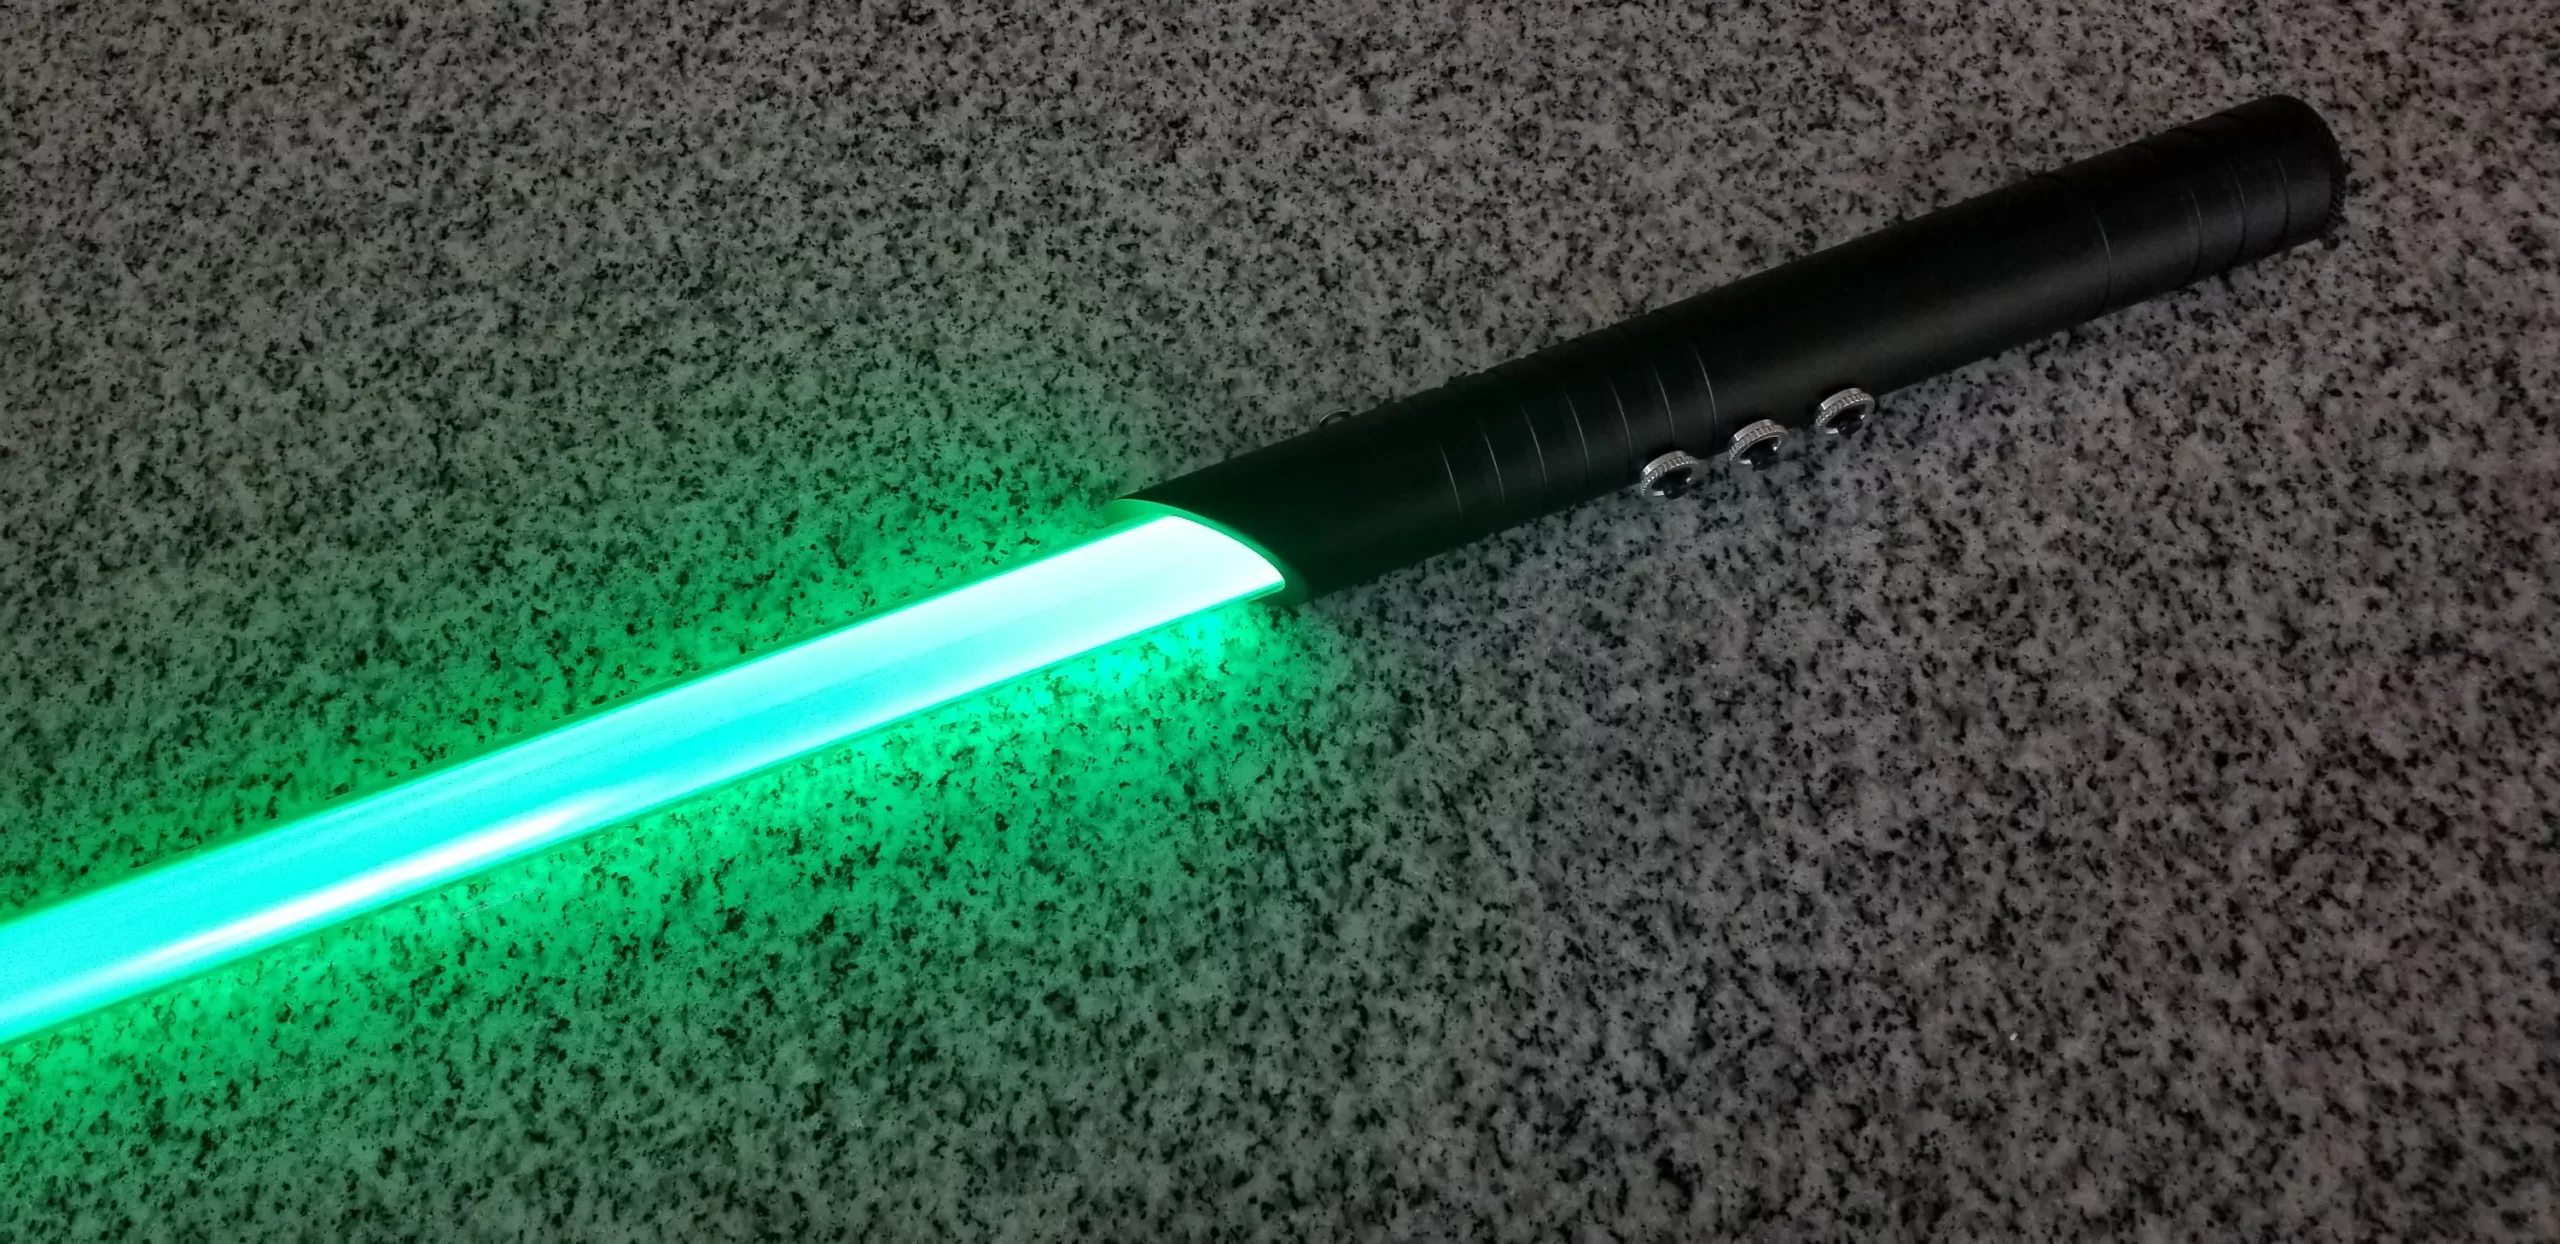 How to Use Your Real Lightsaber Toy